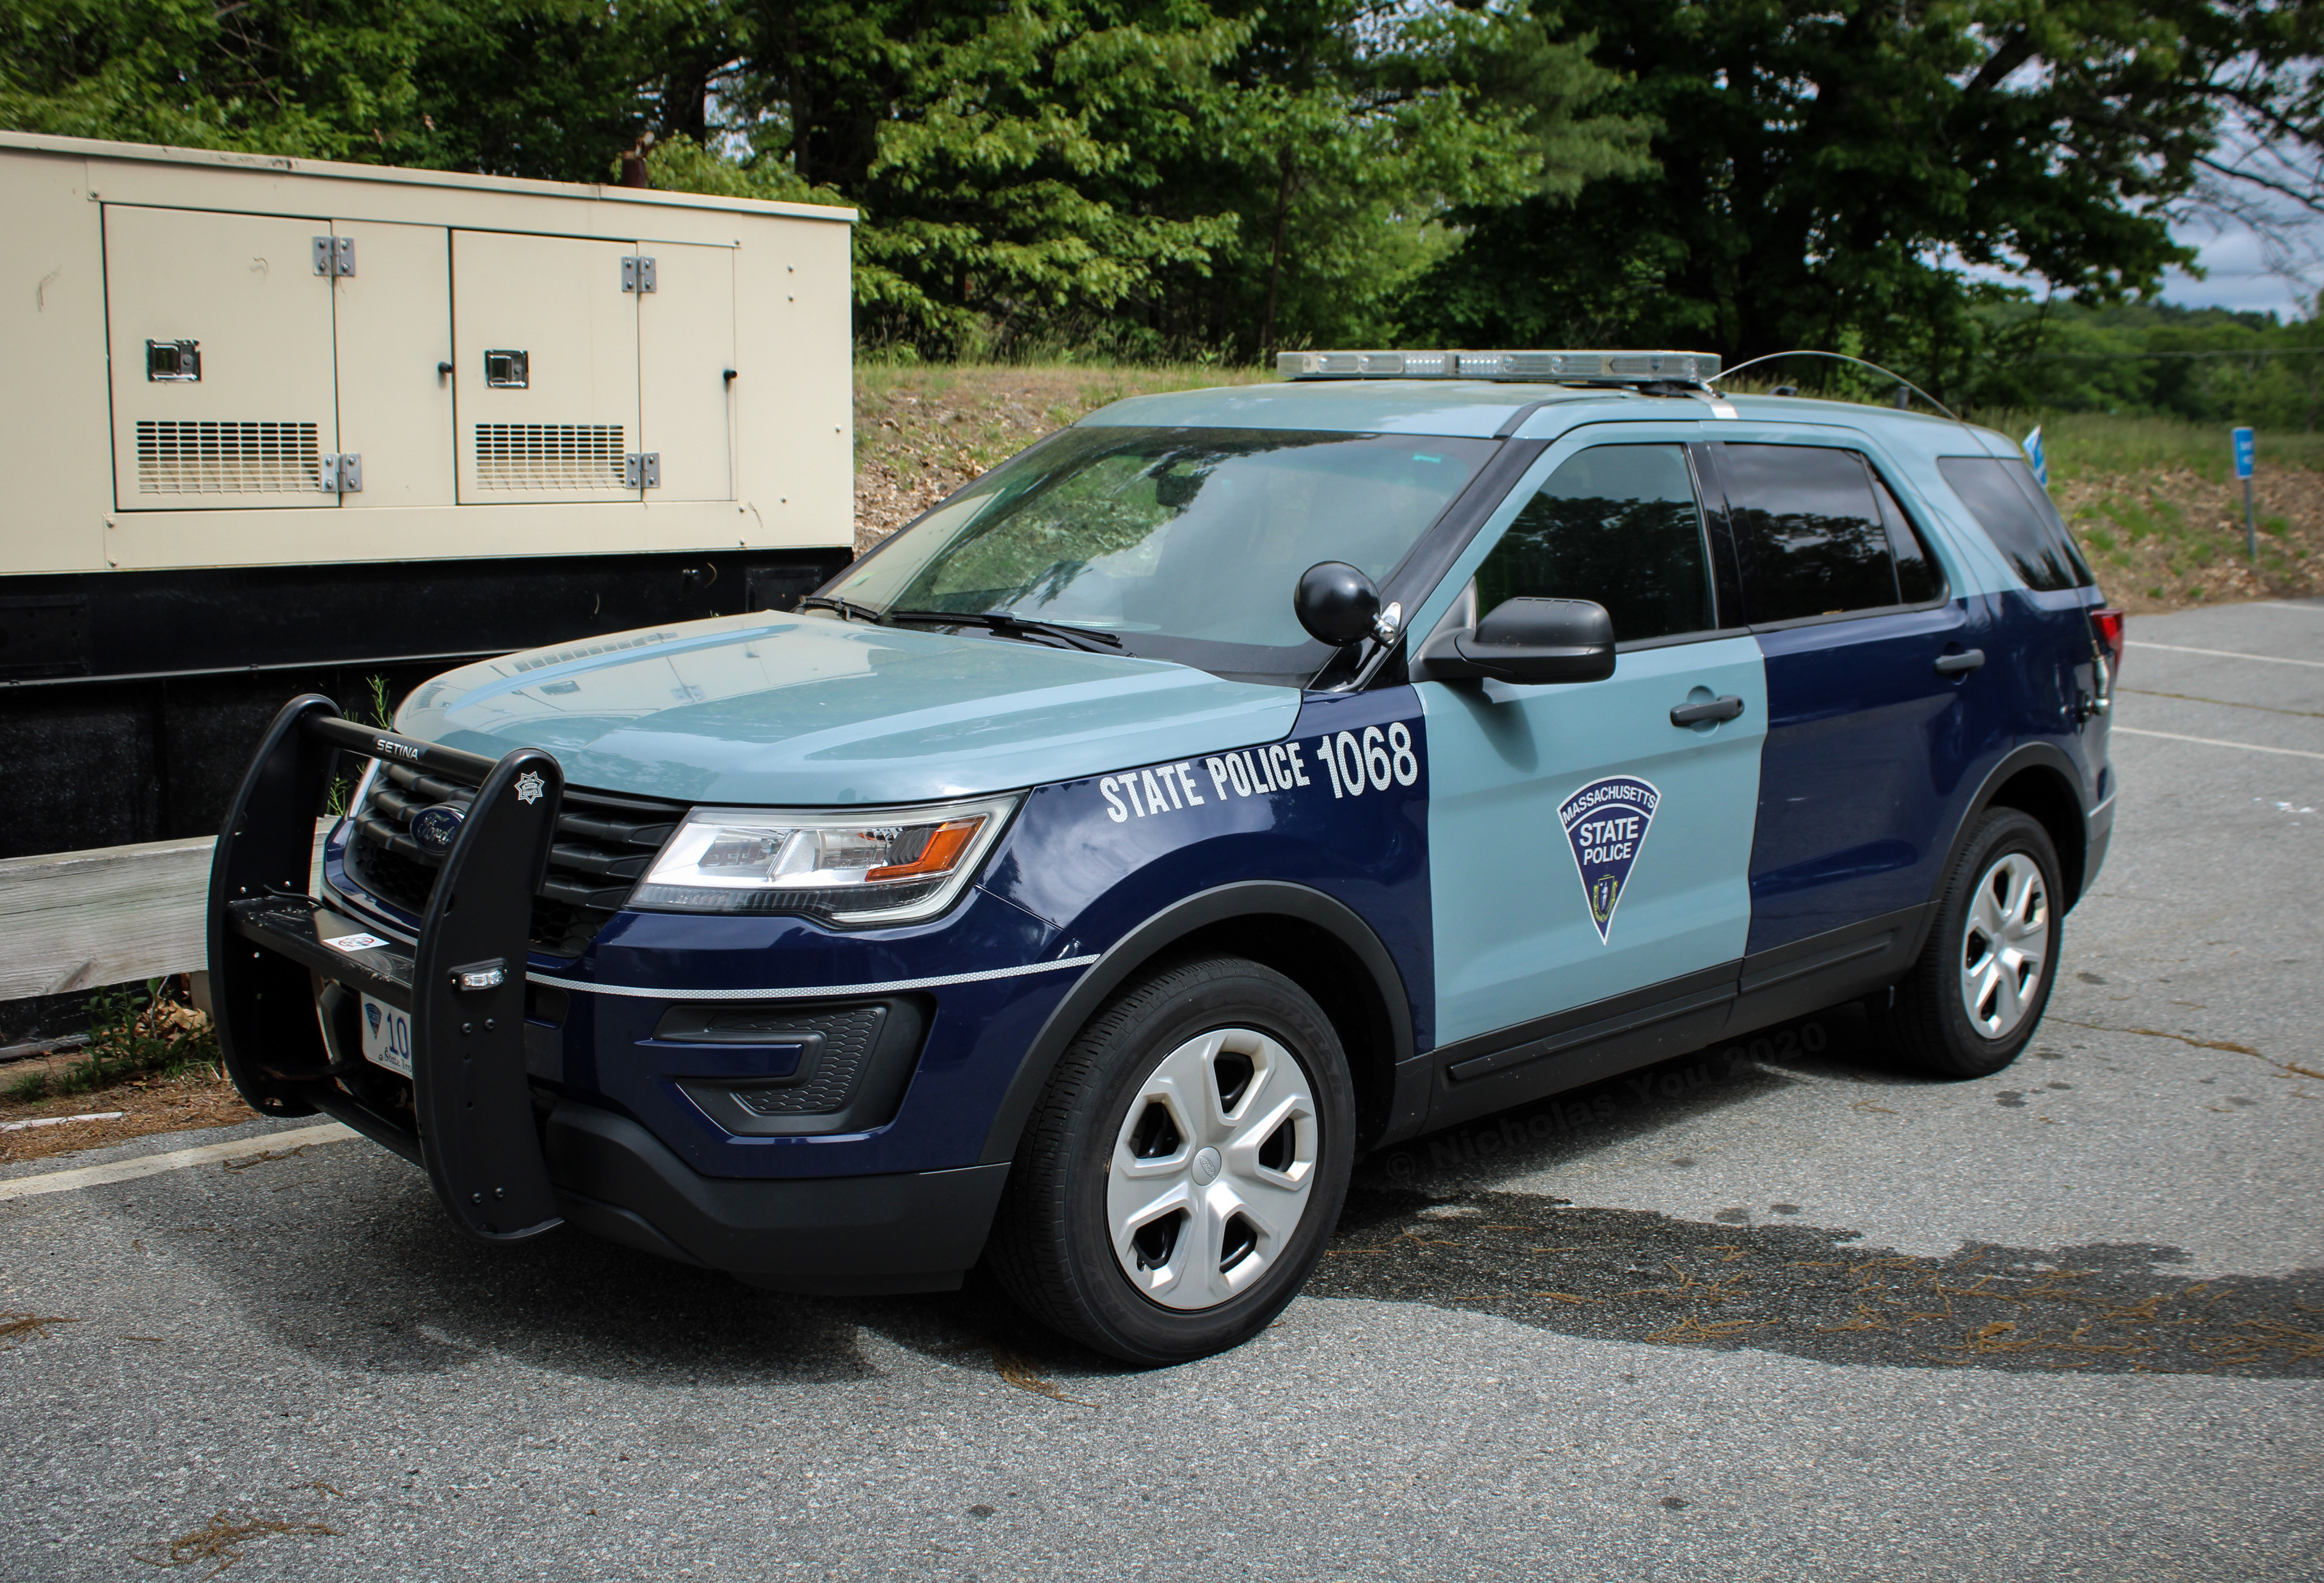 A photo  of Massachusetts State Police
            Cruiser 1068, a 2016-2019 Ford Police Interceptor Utility             taken by Nicholas You